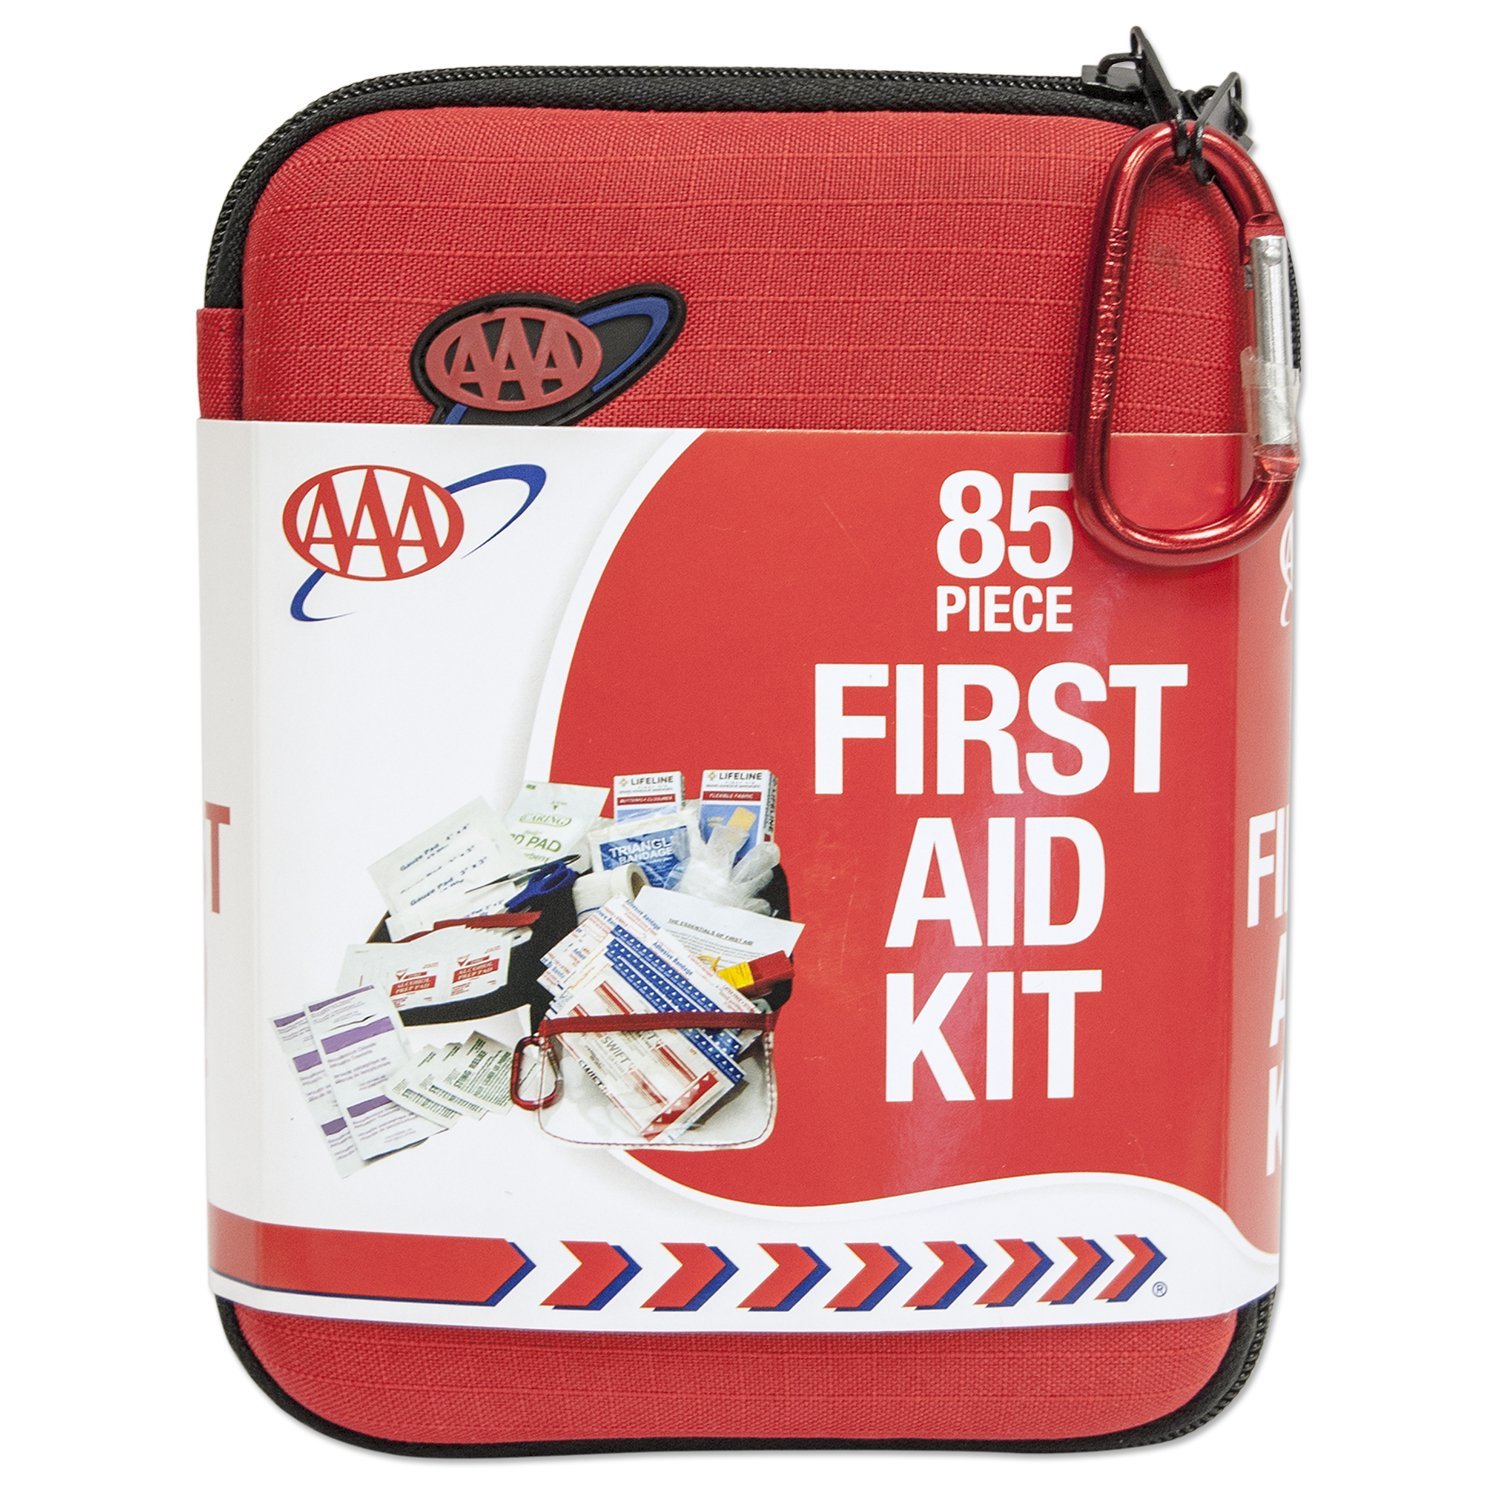 AAA Commuter First Aid Kit